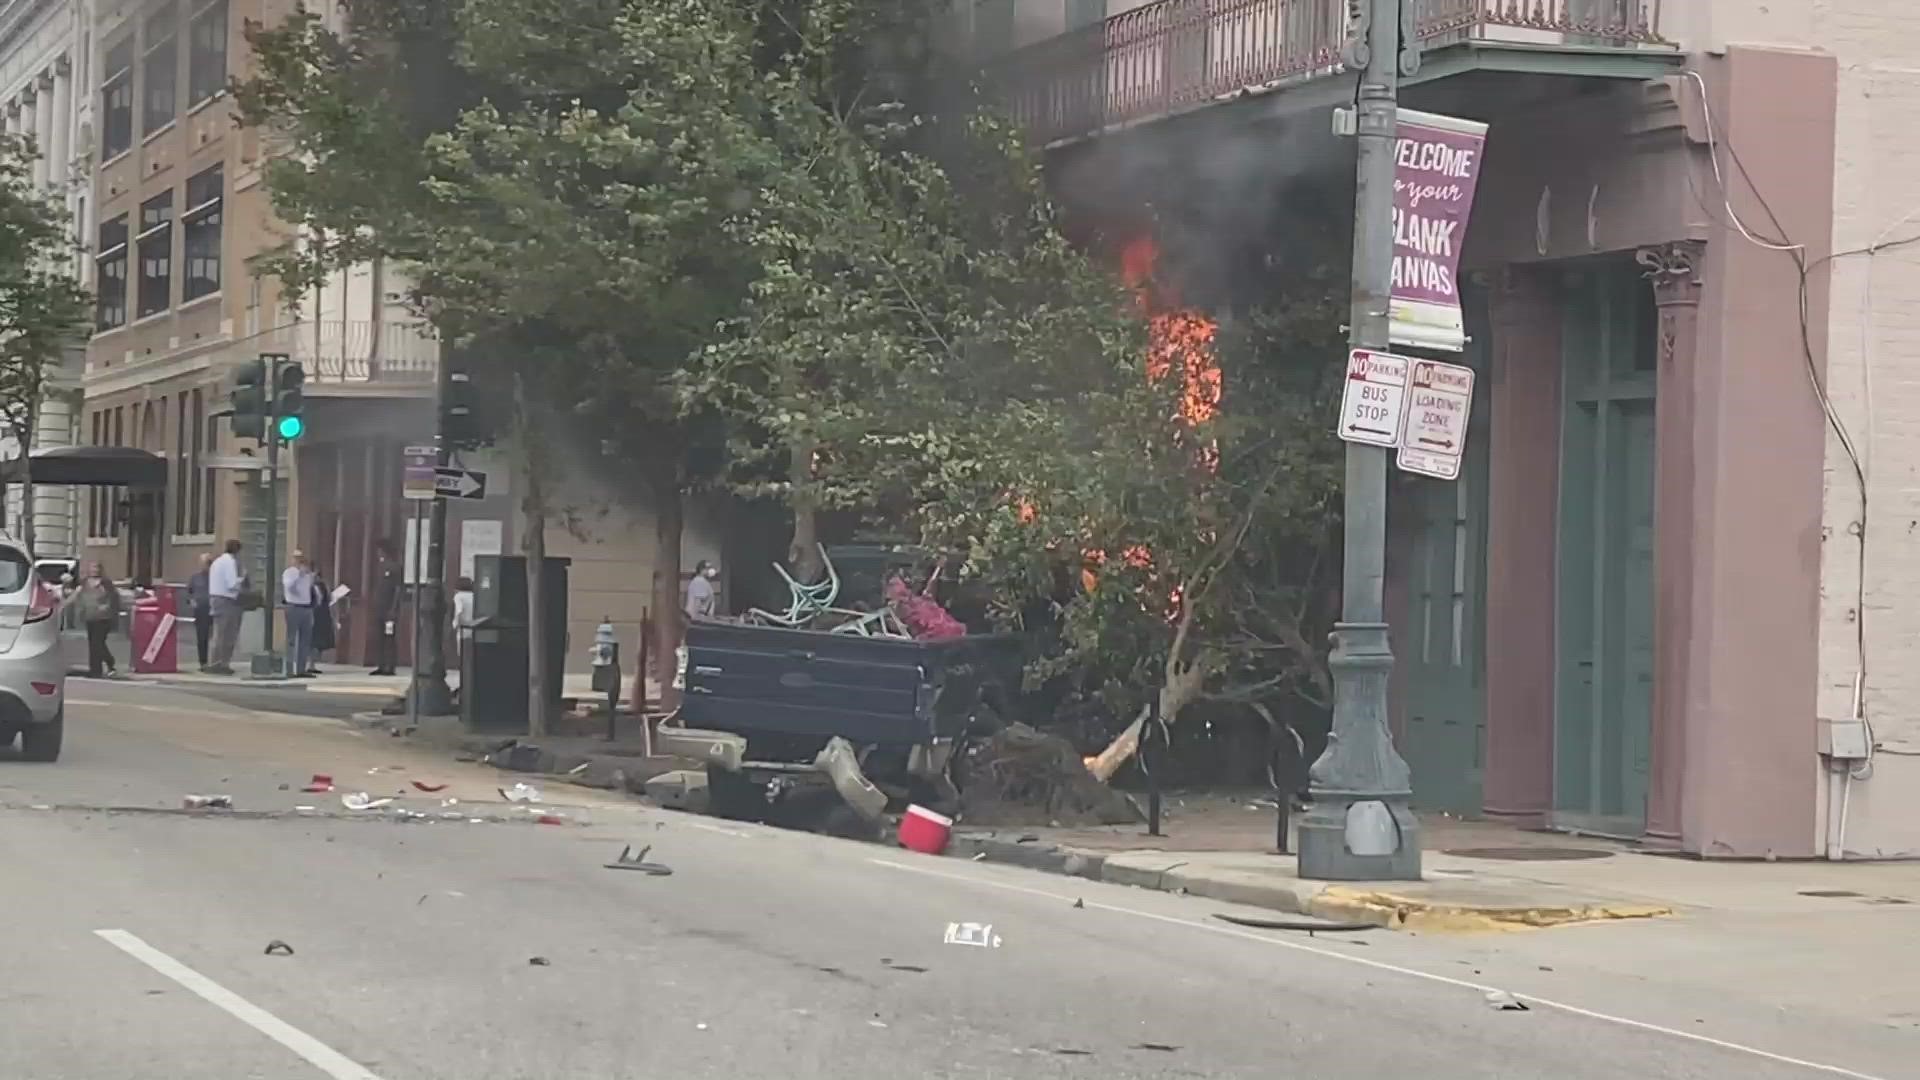 A truck catches fire after crashing into a building in New Orleans Central Business District Thursday.